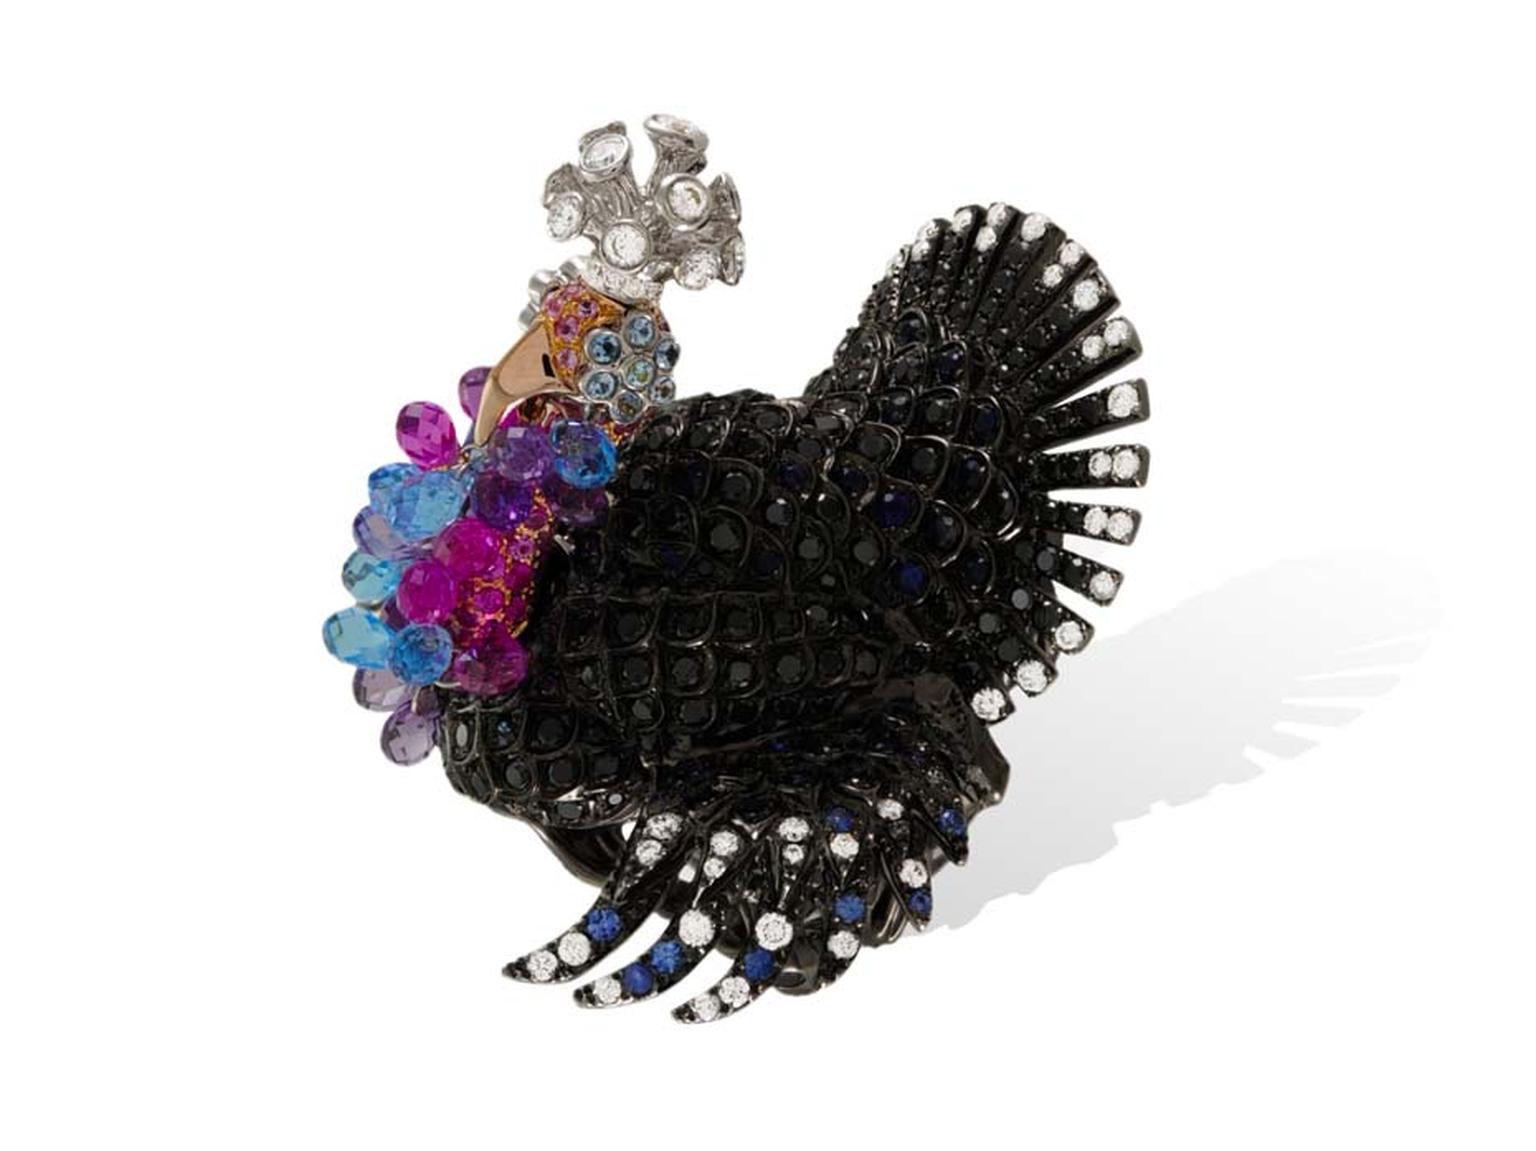 Lydia Courteille Turkey ring in blackened gold from the Animal Farm collection, set with black and white diamonds, topaz and amethyst.